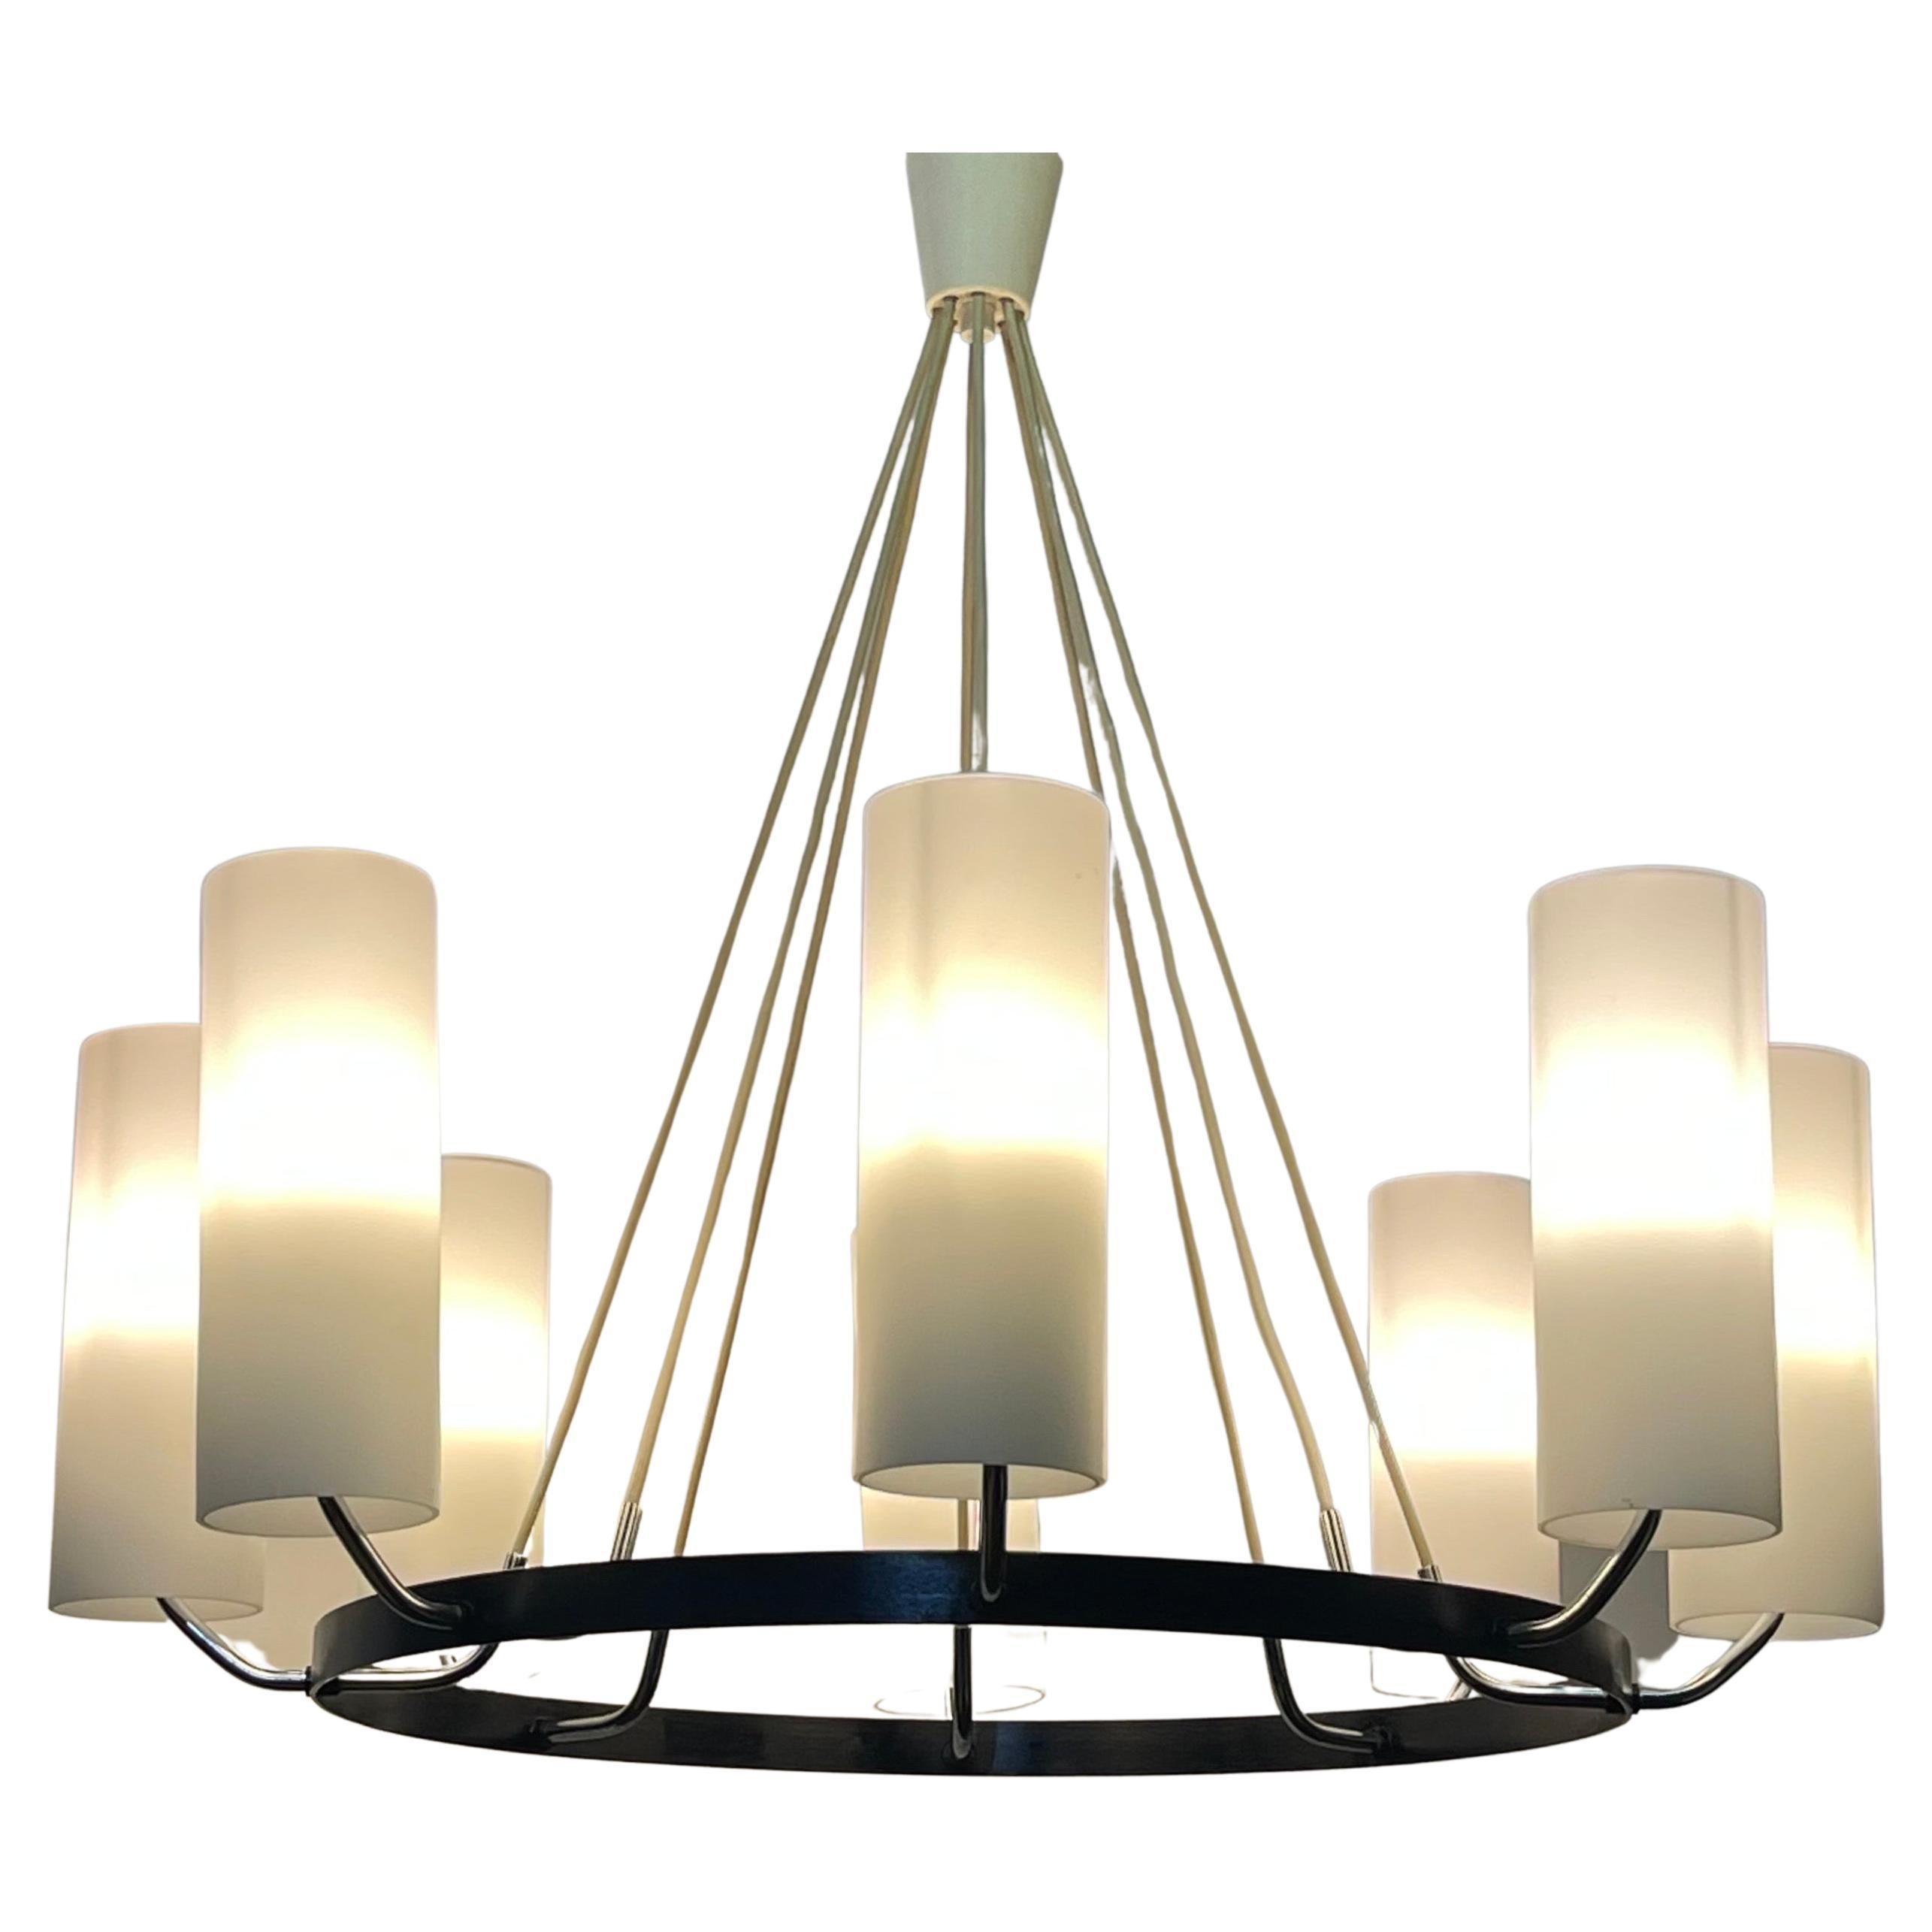 Large Round Milk Glass Tubes Chandelier attr. to Kaiser, Germany, 1950s